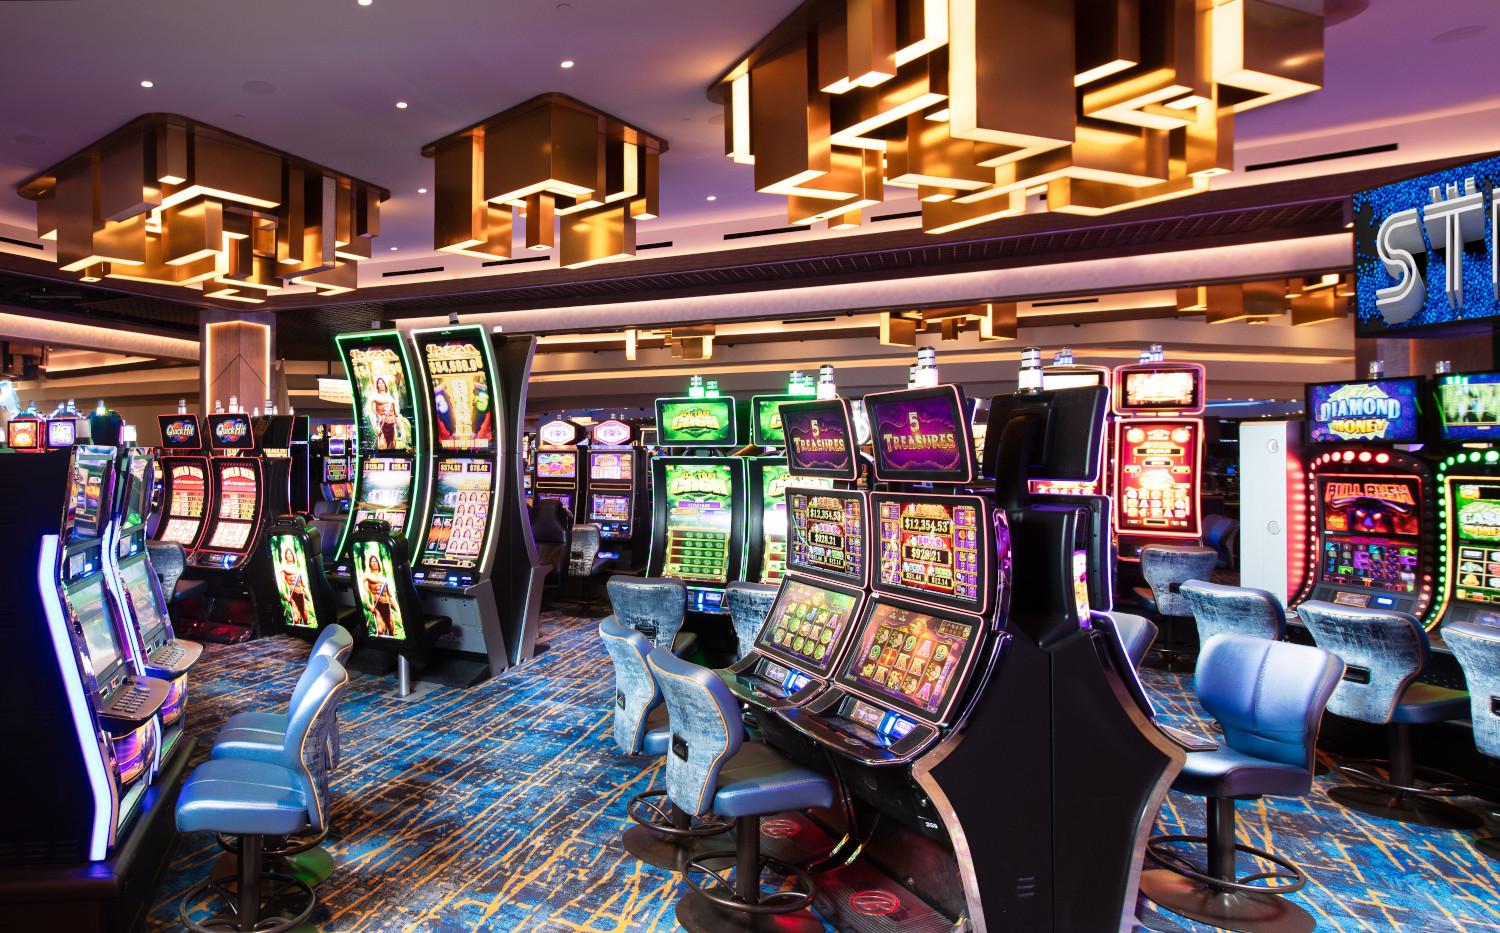 Growth in technology has caused many advancements for slot game enthusiasts.